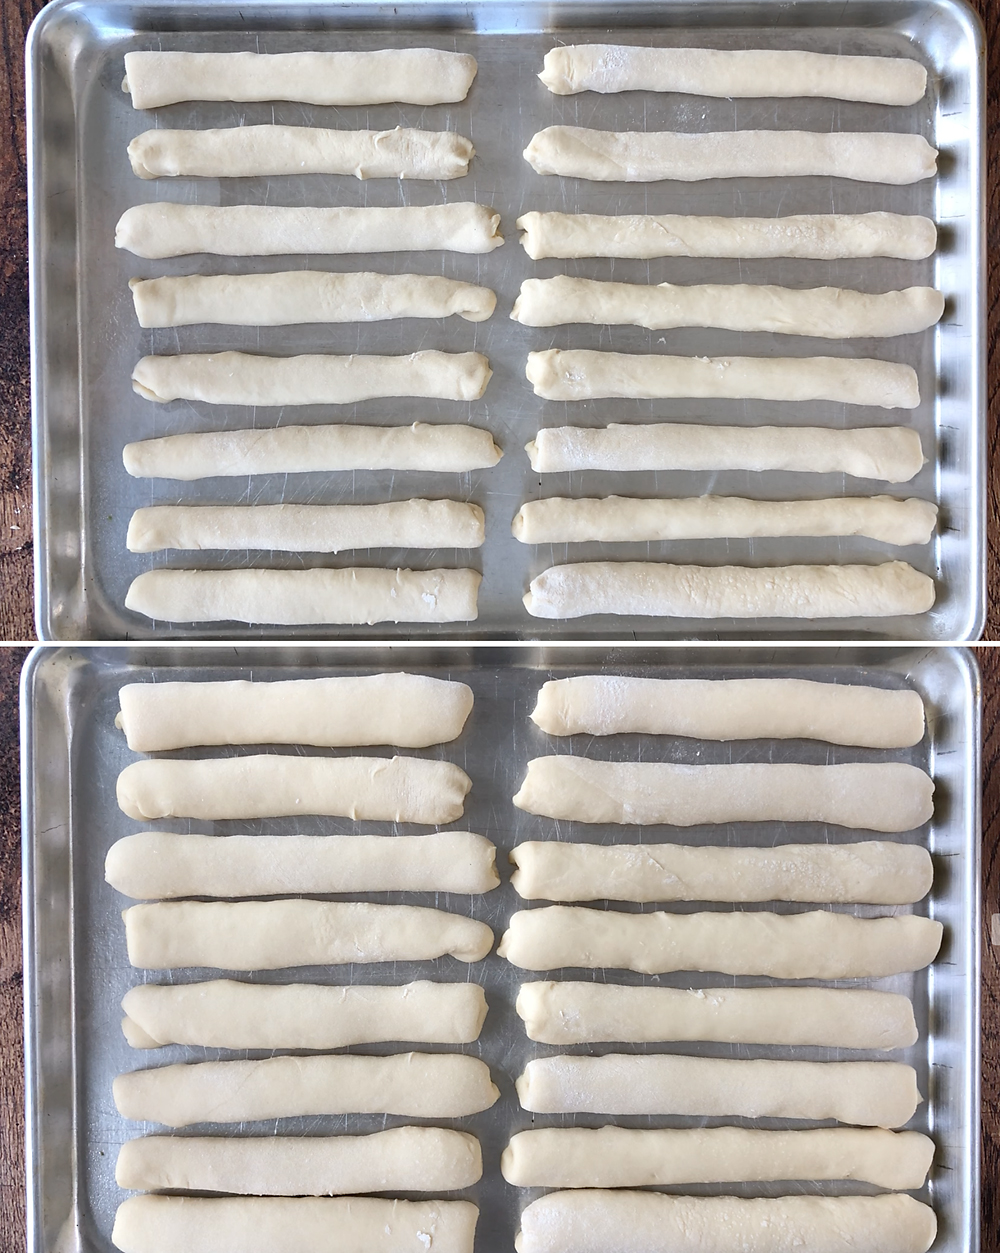 Breadsticks on a baking sheet before and after rise